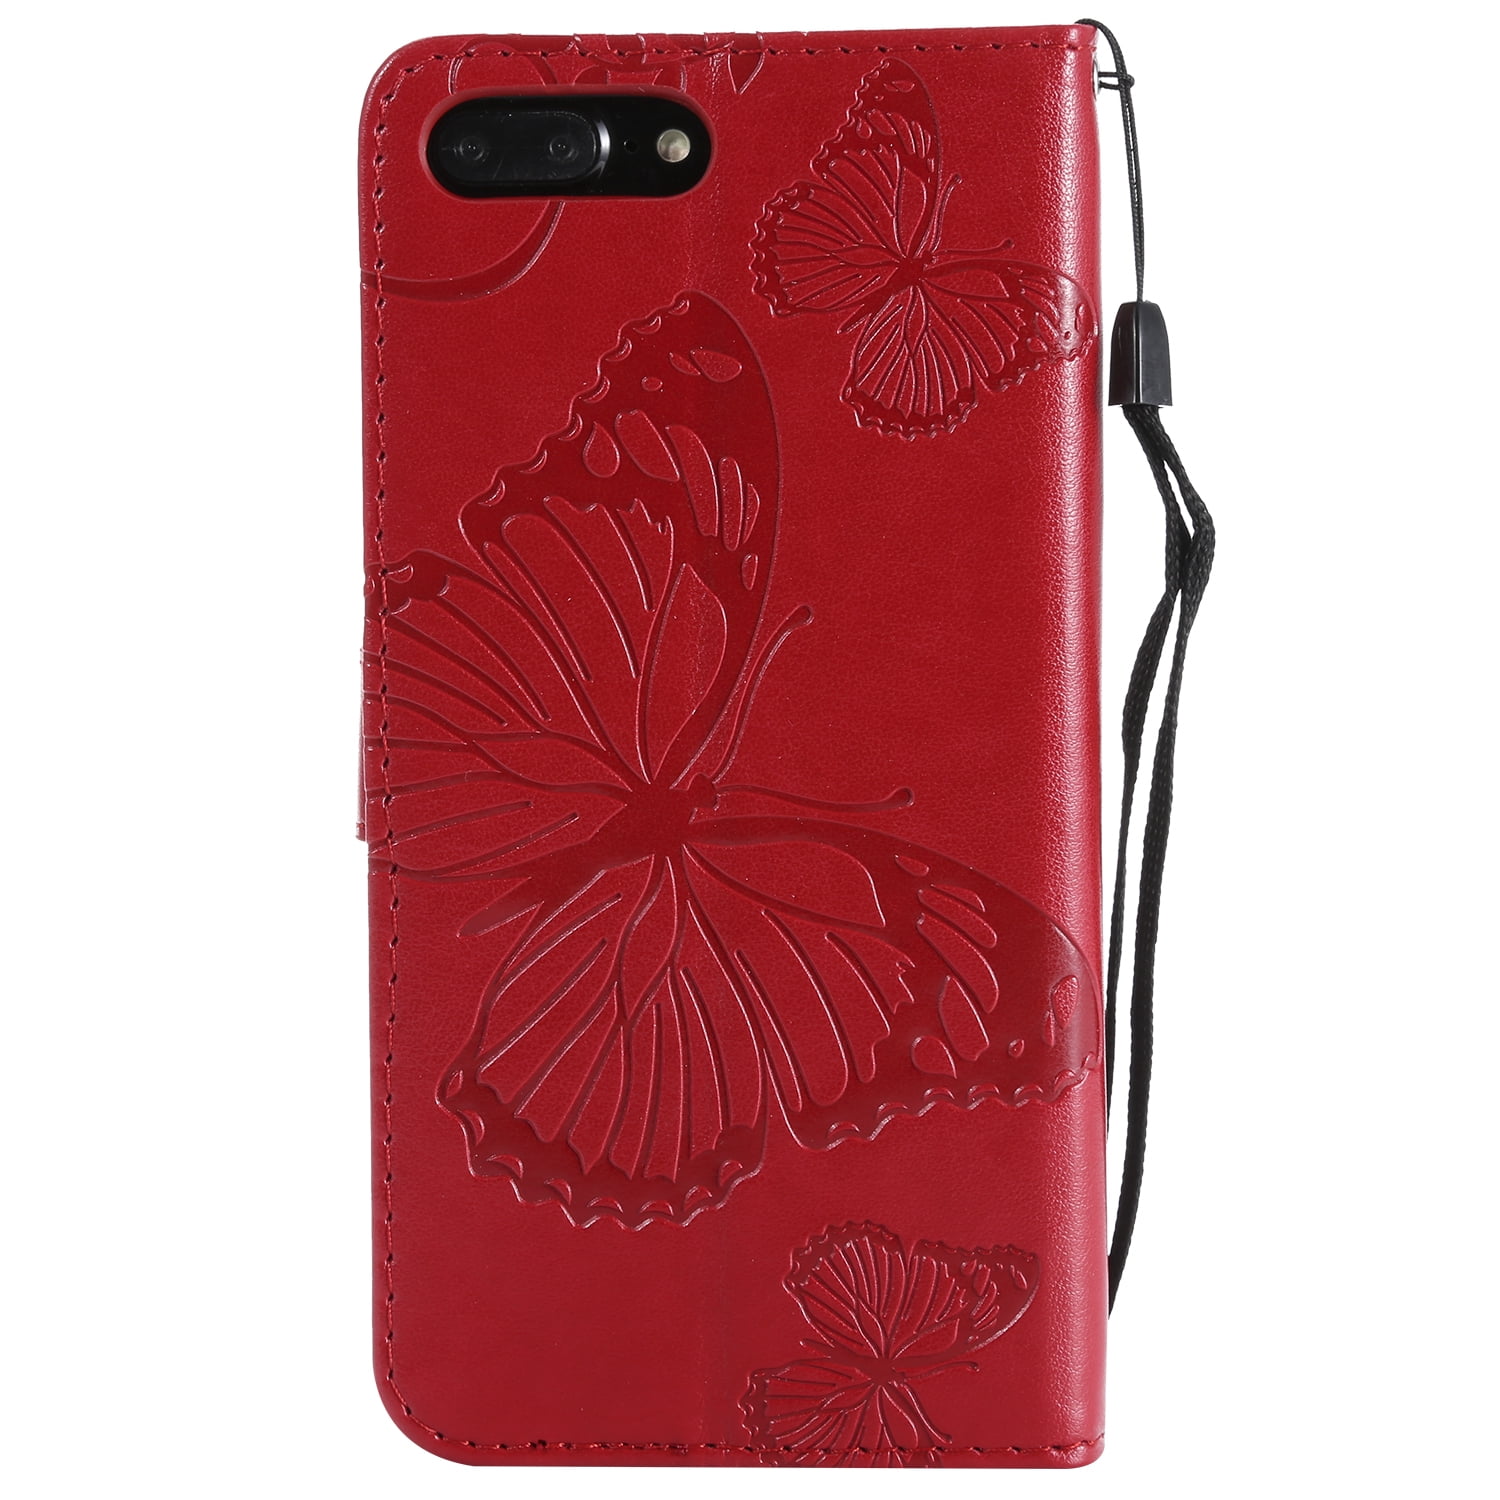 iPhone 8 Plus LV cover case - trunk style - cell phones - by owner -  electronics sale - craigslist